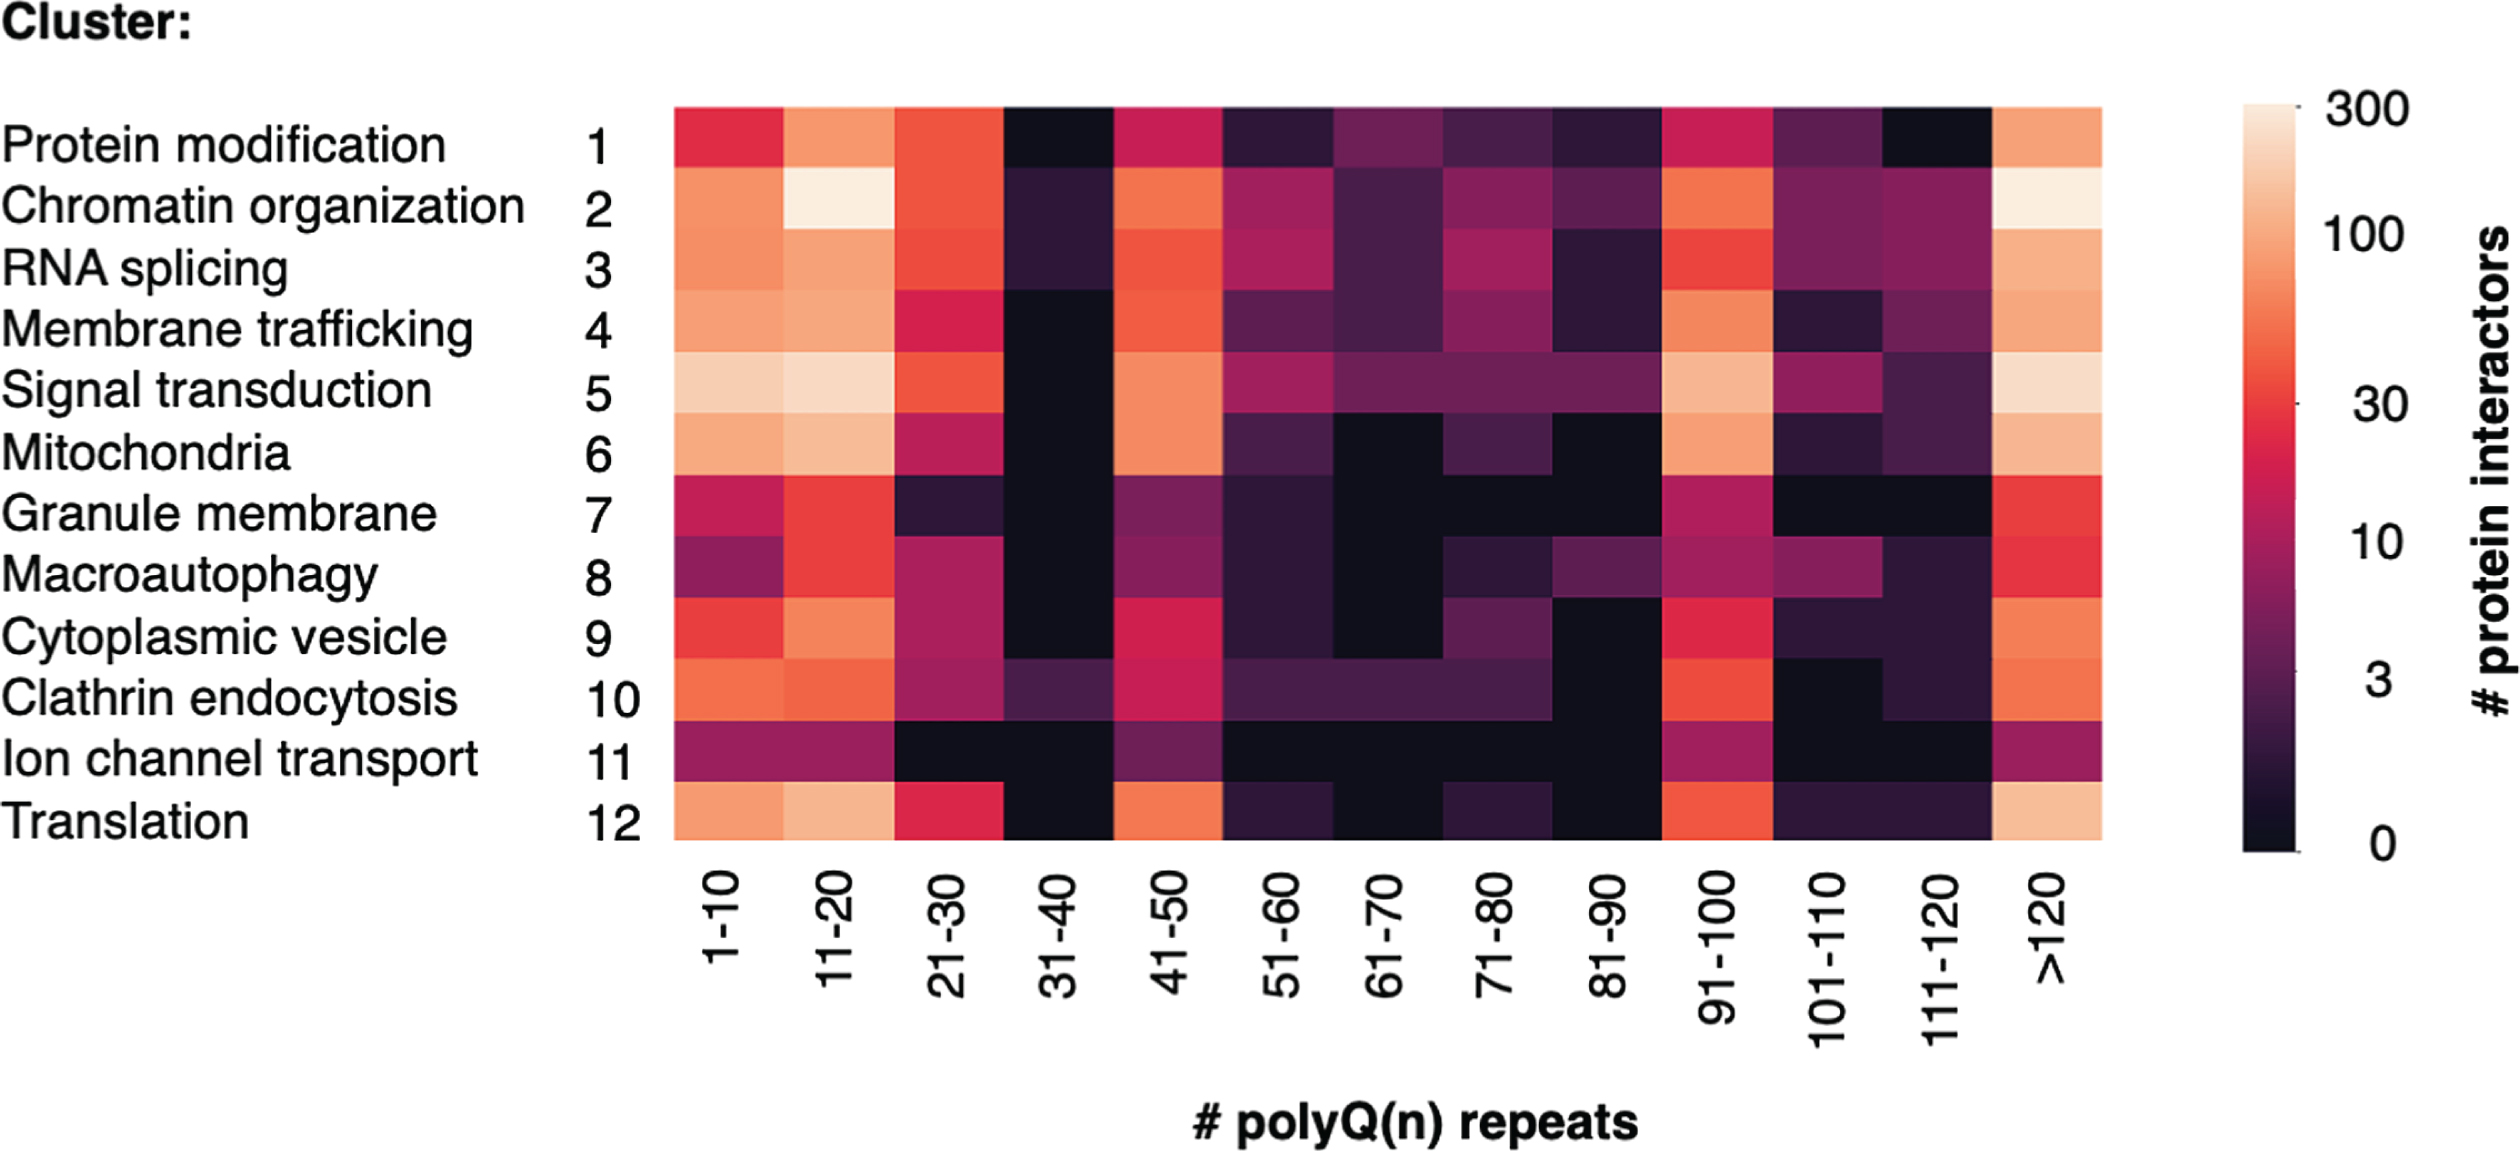 Number of Htt interactors identified by Htt polyQ(n) length within each cluster. The number of polyQ(n) expansions in Htt used for identification of Htt interactors within each cluster category is indicated. Low to high numbers of interacting proteins identified are color-coded (see key).